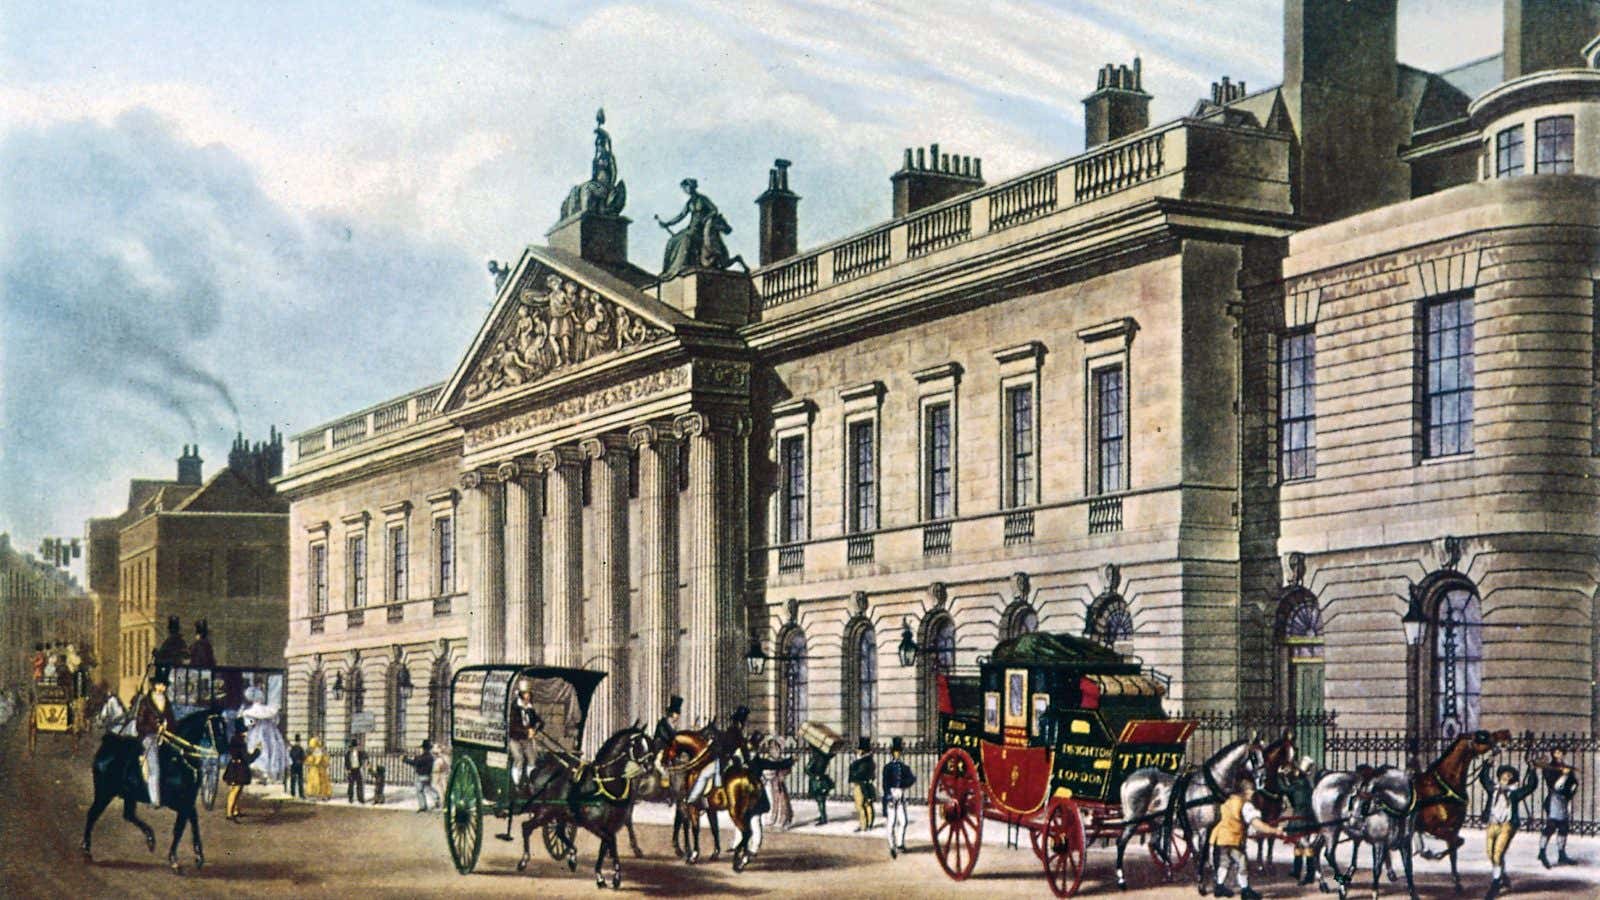 The headquarters for the East India Company, built in 1726, is an early example of a multipurpose building with offices.